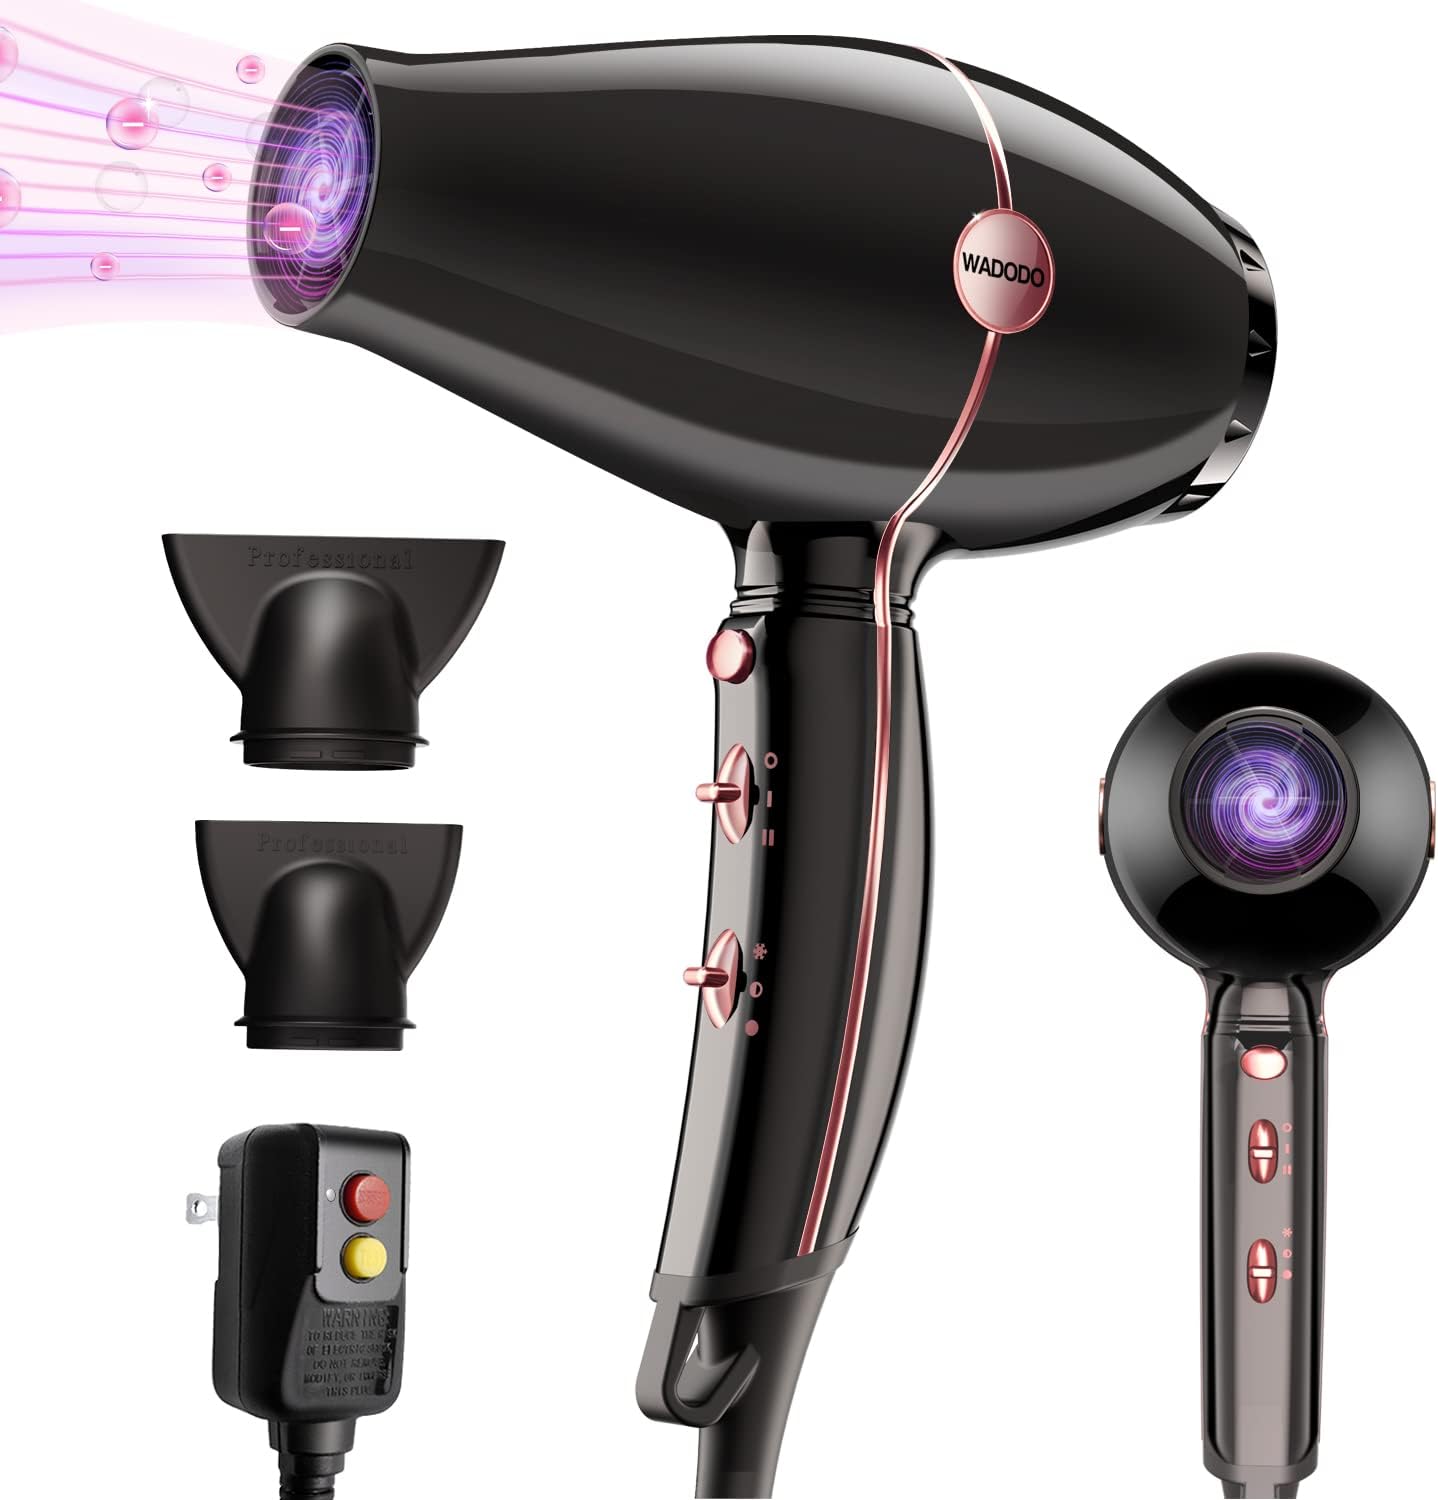 Ionic Hair Dryer, 2000W Professional Blow Dryer Fast Drying Hairdryer Travel Blowdryer, Lightweight Constant Temperature Low Noise Portable Salon Ion Hair Dryers for Women Men(Bright Black)